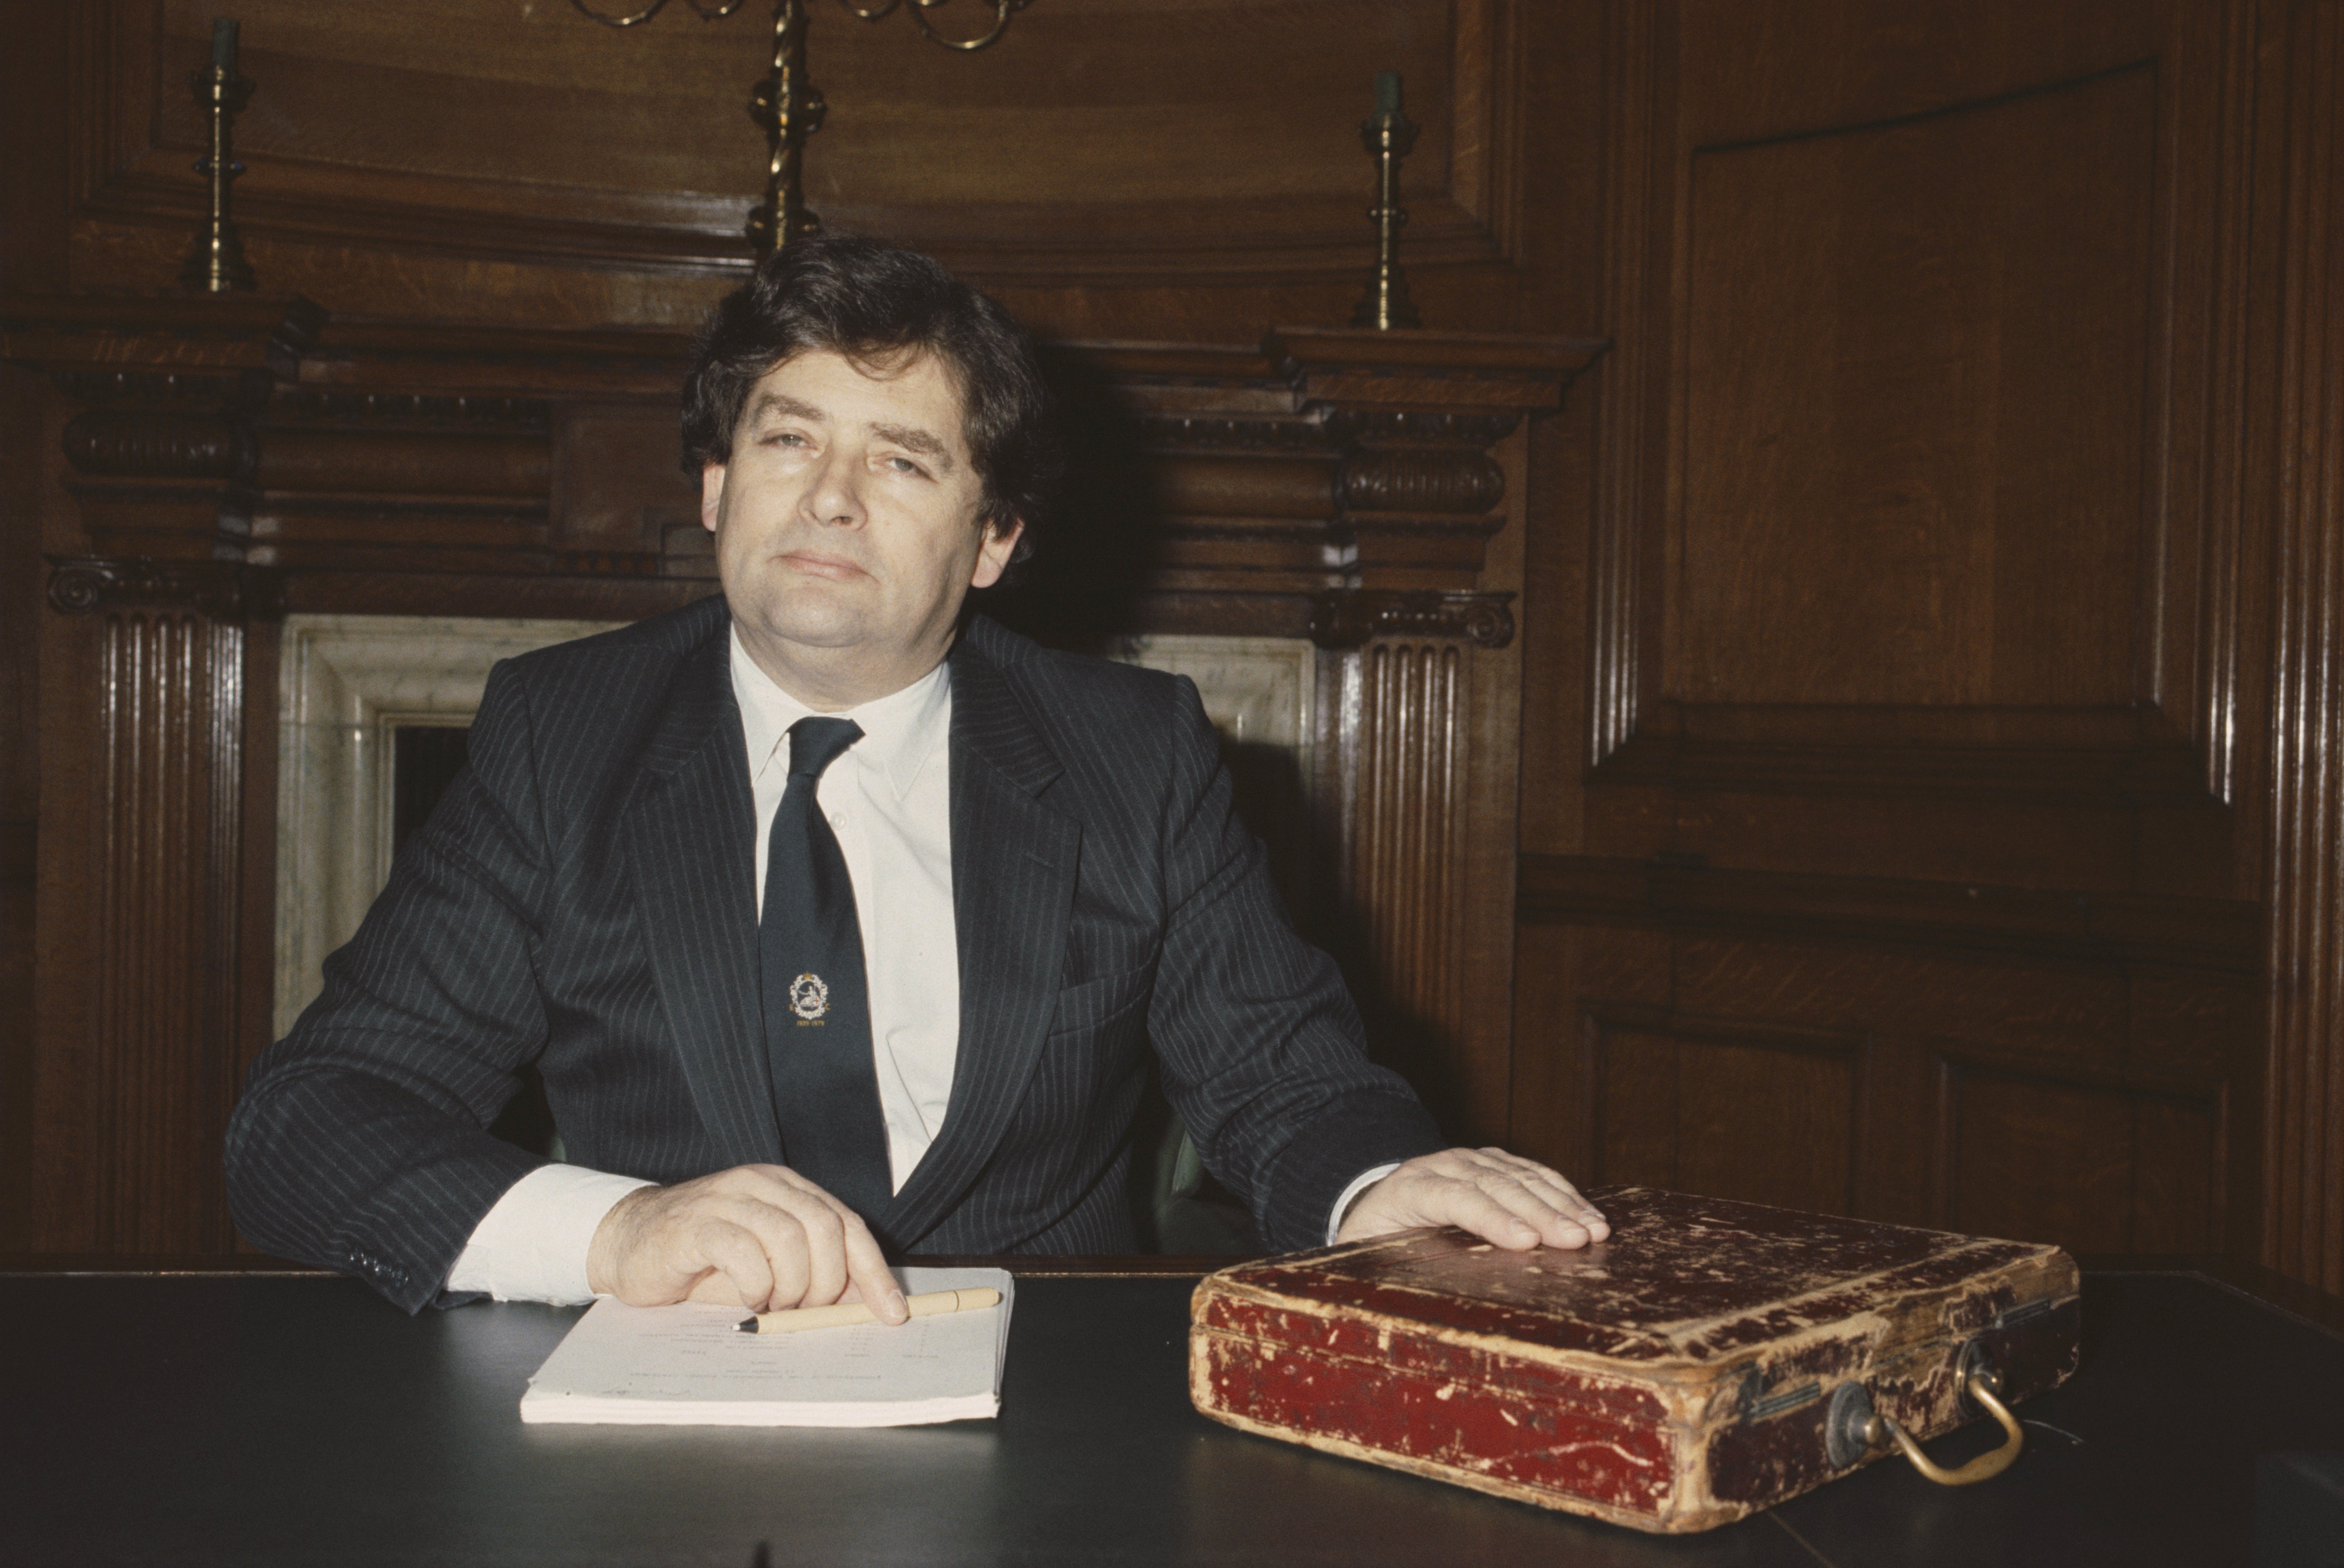 Nigel Lawson was closely associated with the economic reforms and privatisation policies which marked Margaret Thatcher’s premiership and significantly reshaped Britain